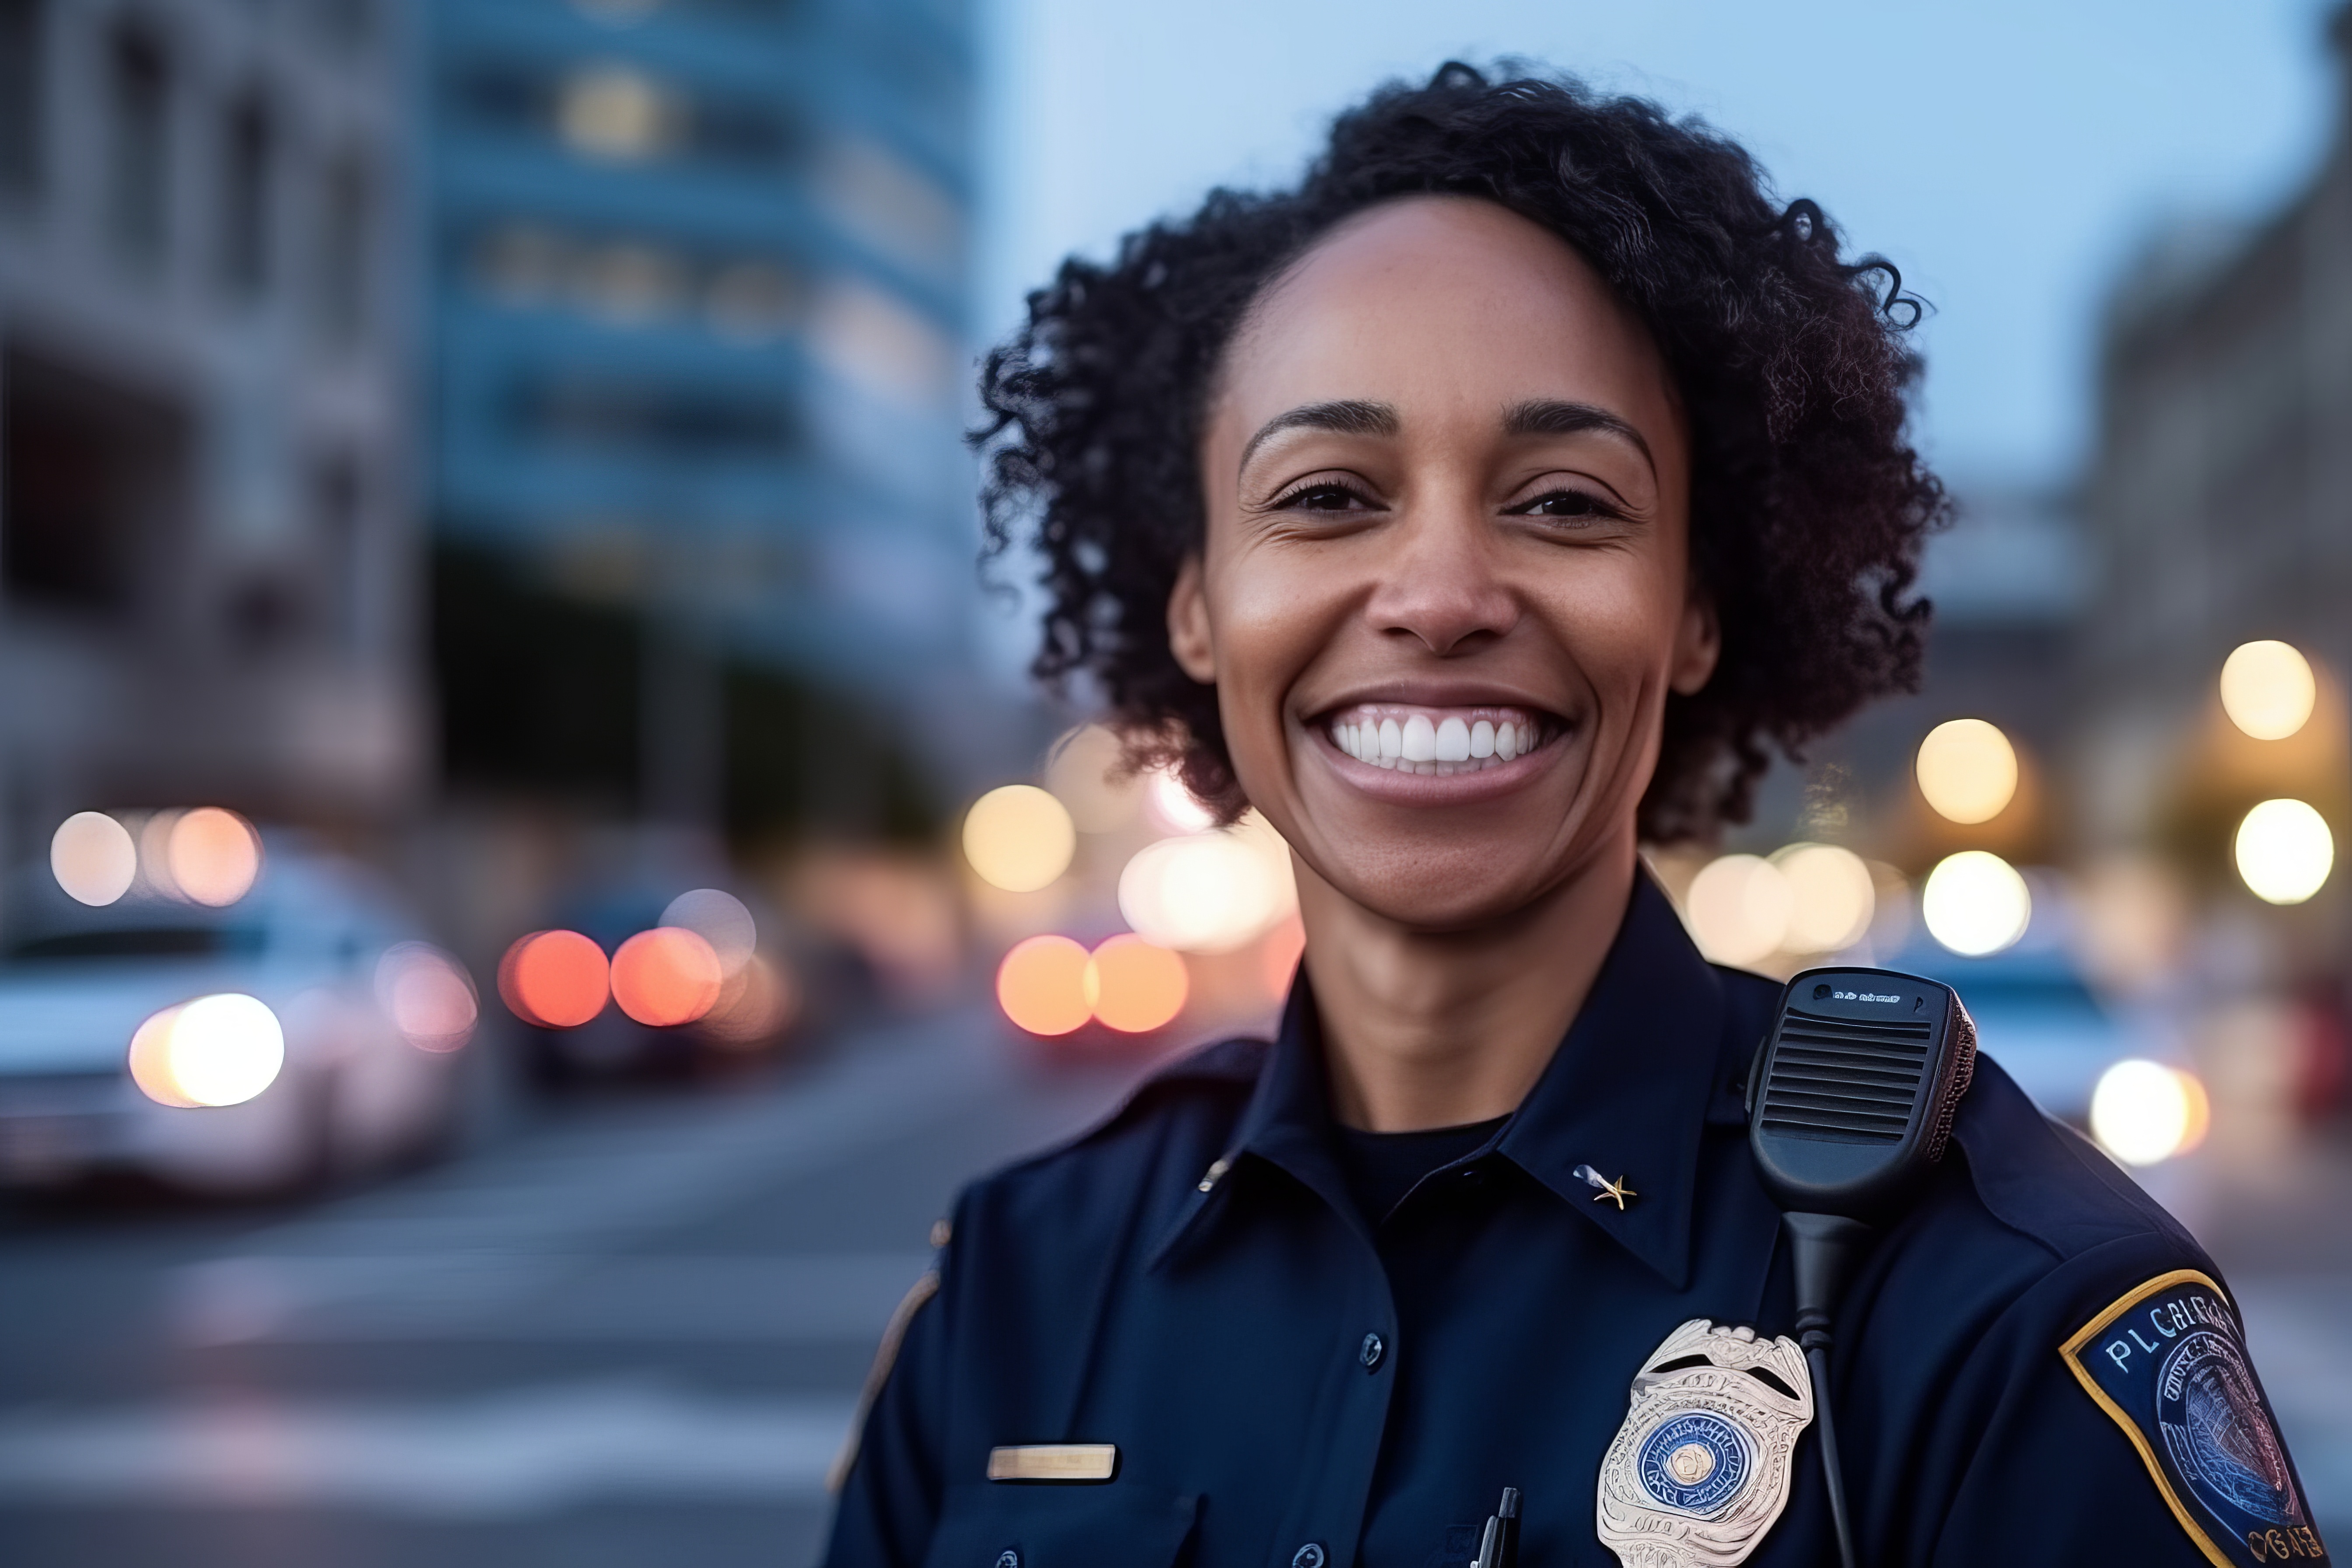 A woman wearing a police uniform stands on a city street at dusk.